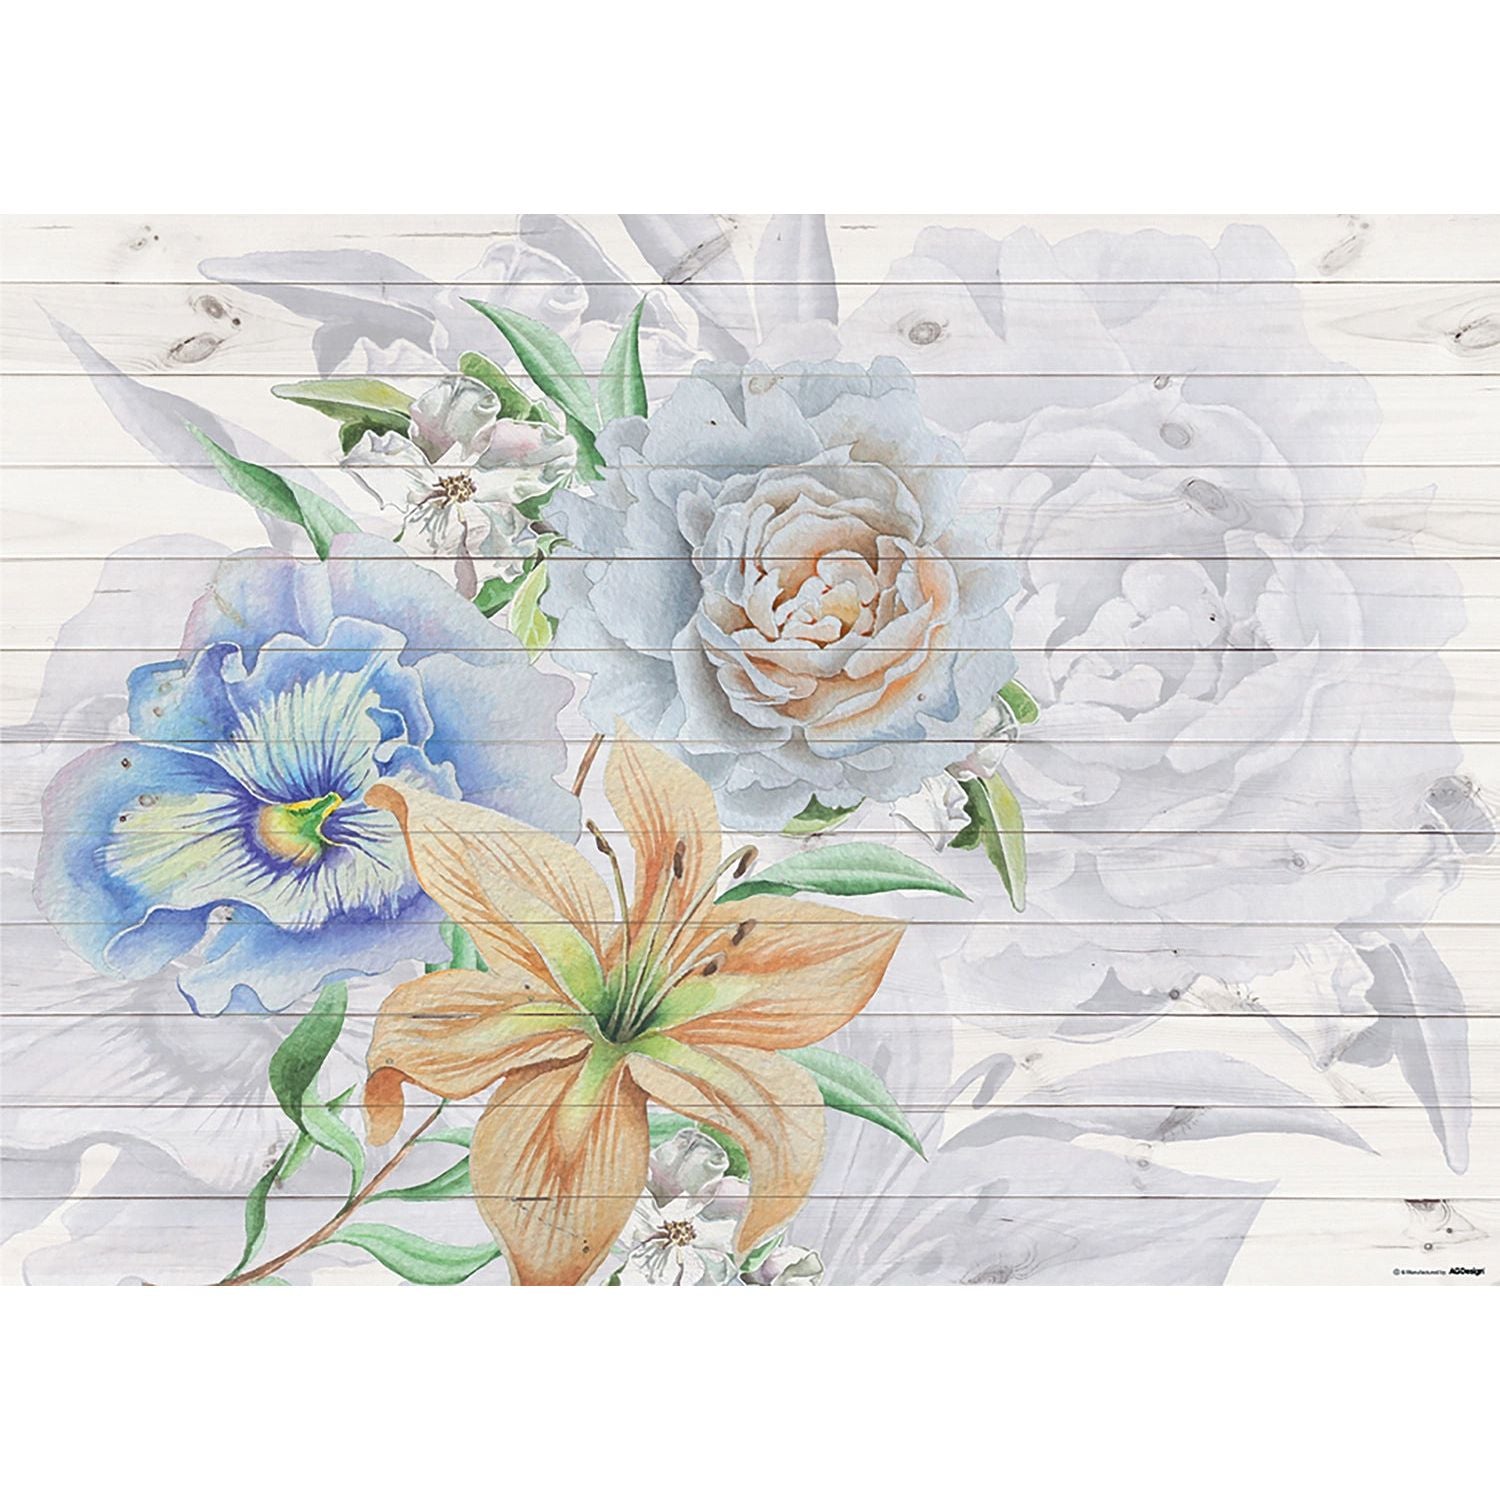 Rustic Harmony: Watercolor Florals on Whitewash Wall Mural